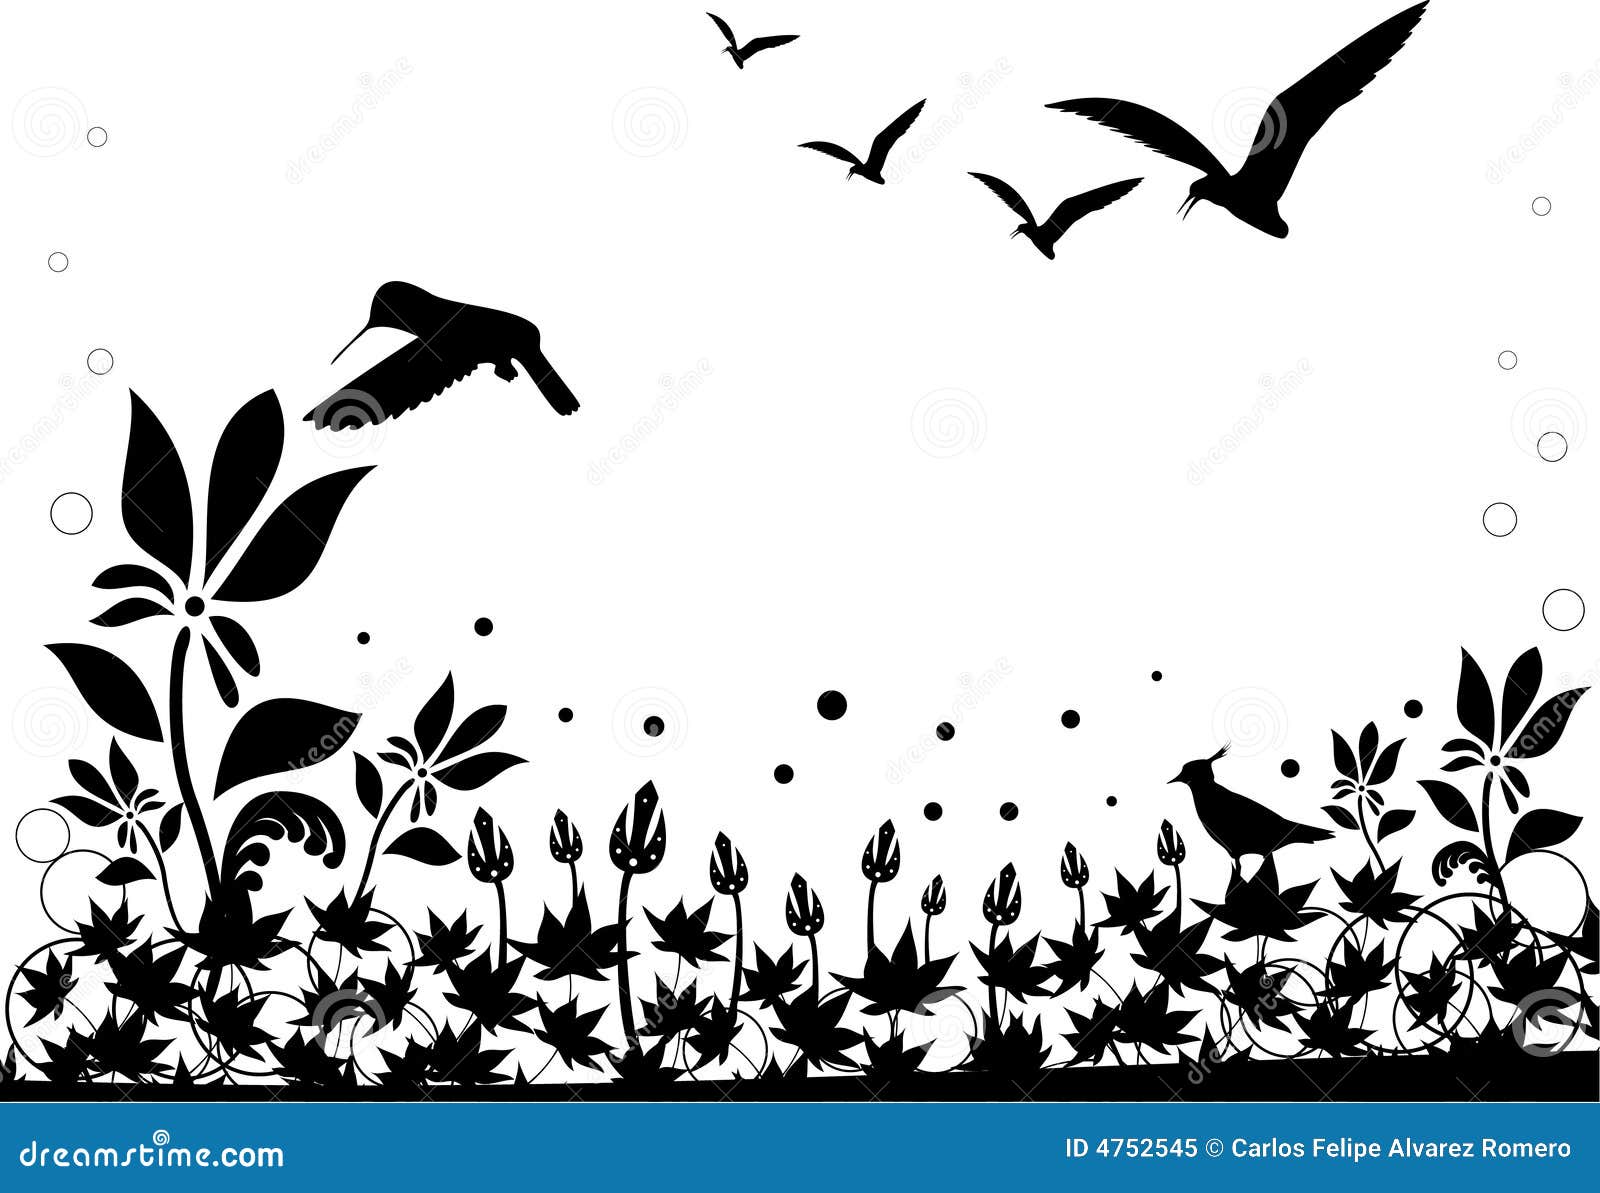 free black and white nature clipart - photo #13